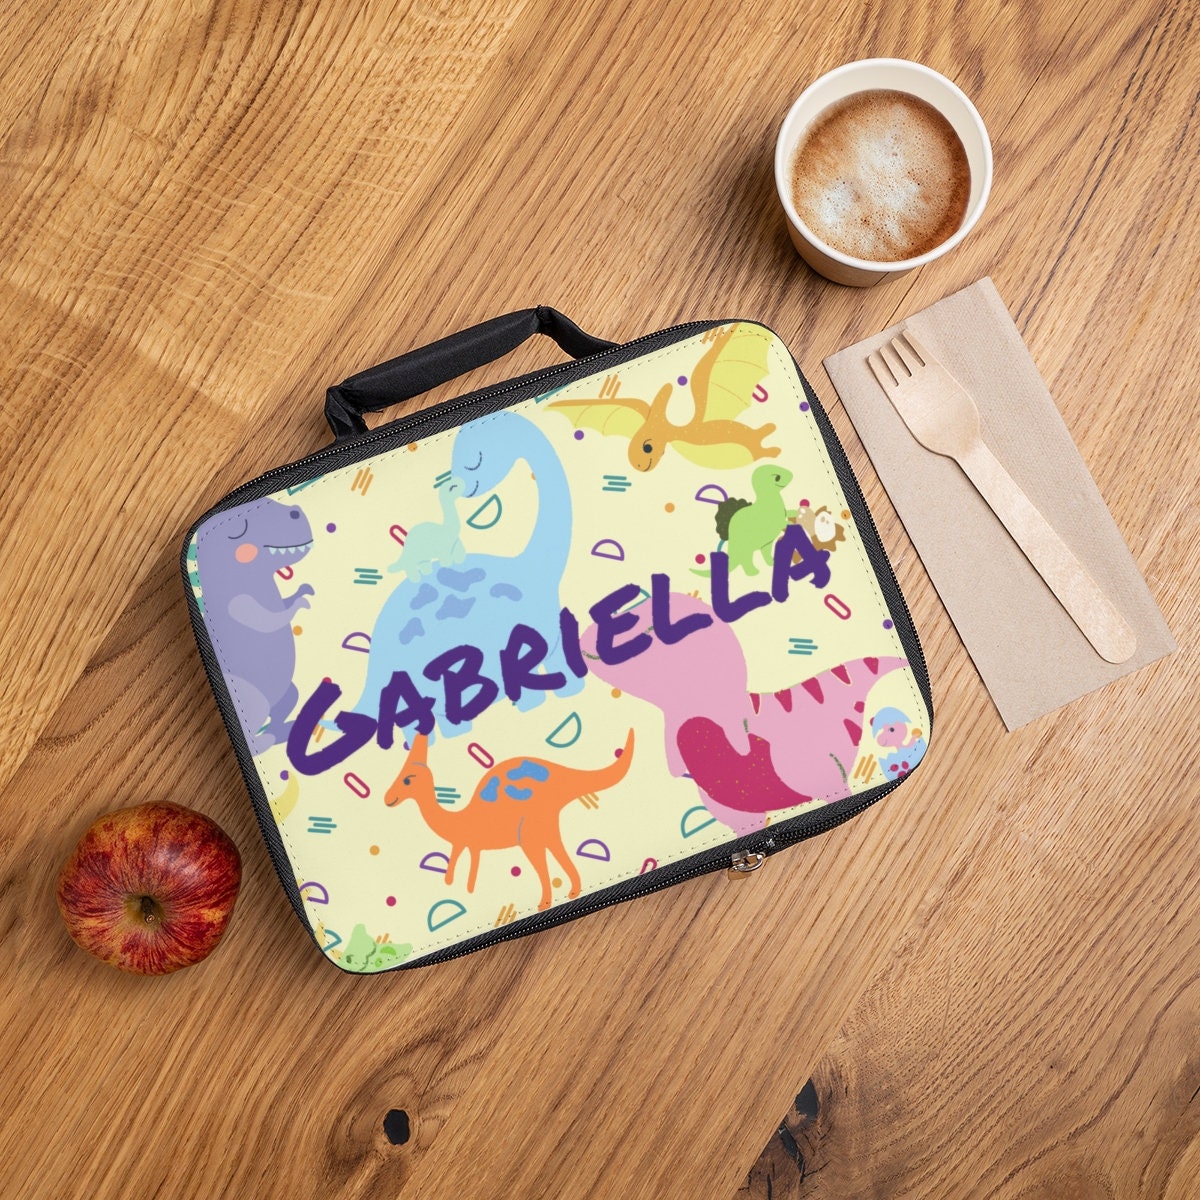 Prehistoric Friends Personalized Blue Lunch Box